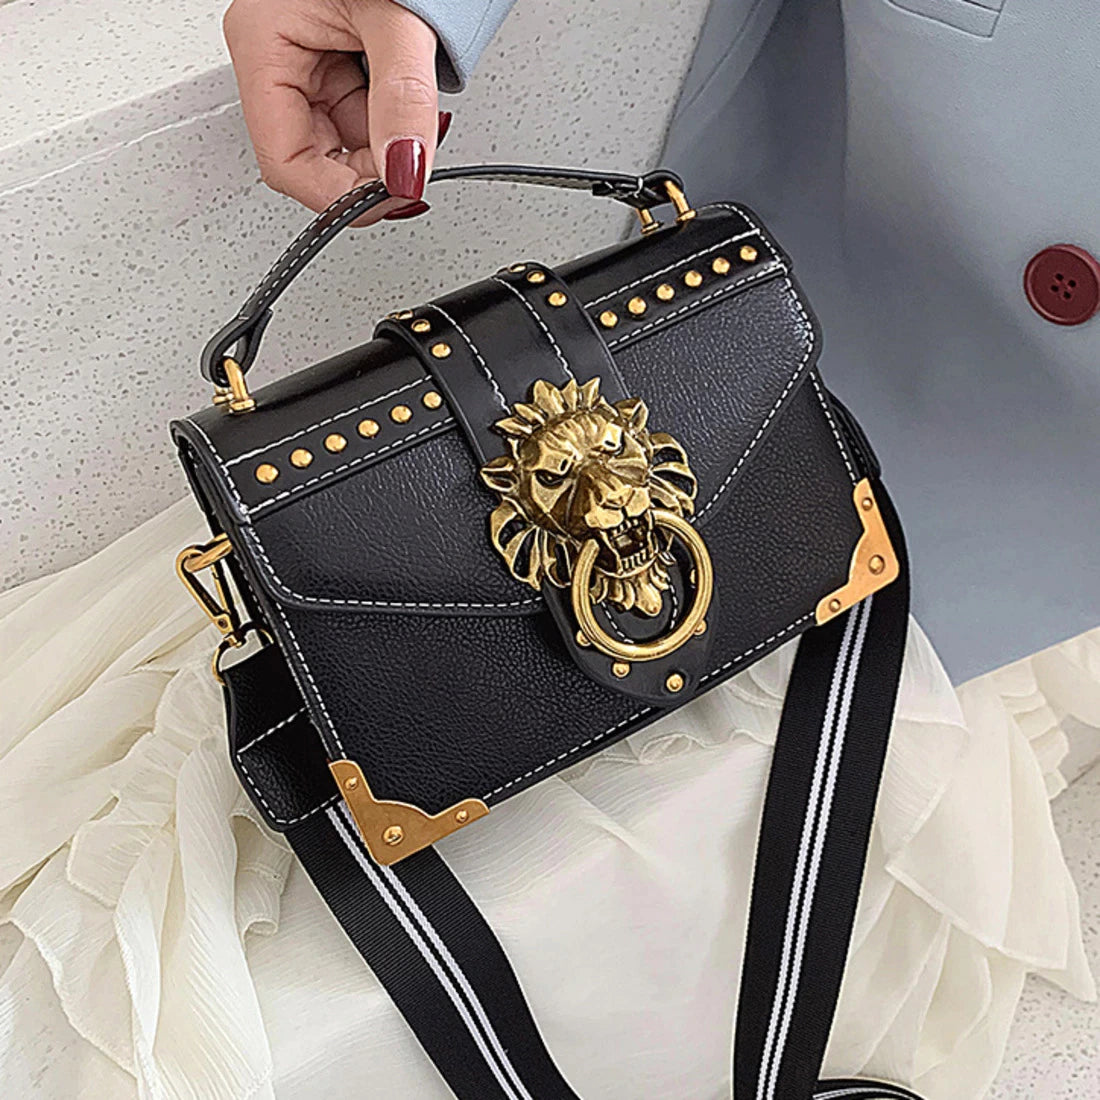 luxury bag with metal lion head detail